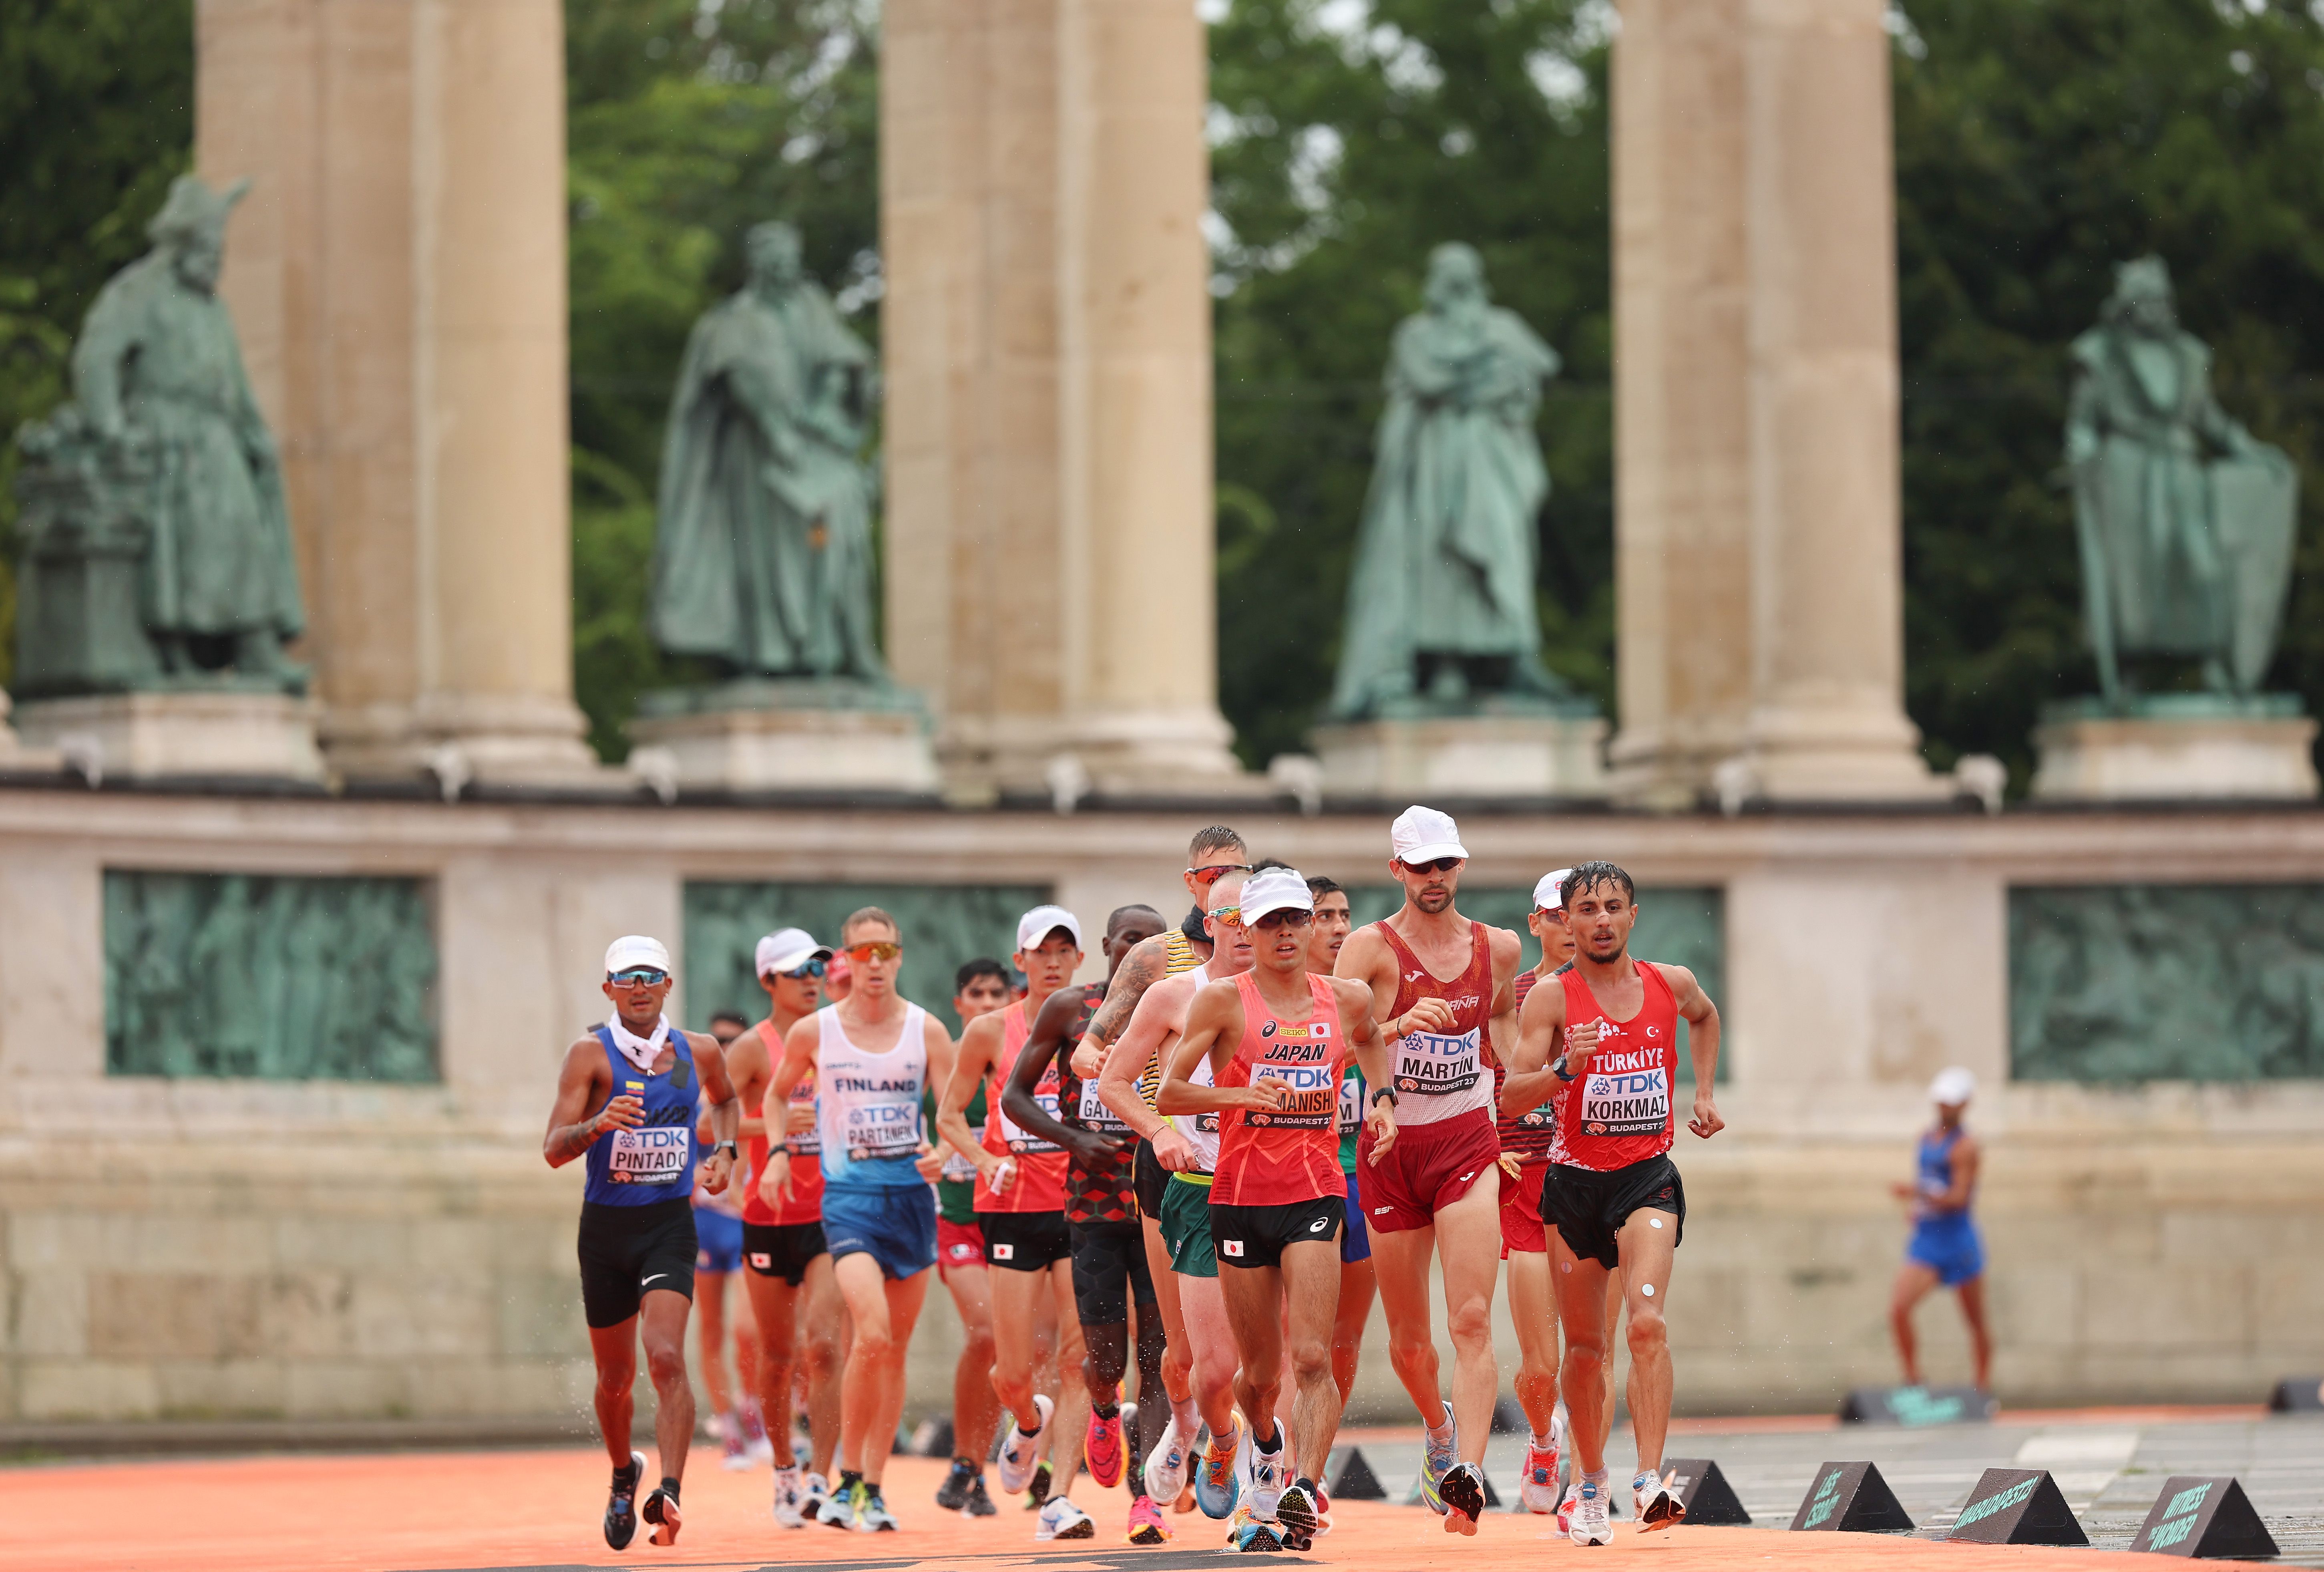 The lead pack in the 20km race walk at the World Athletics Championships Budapest 23